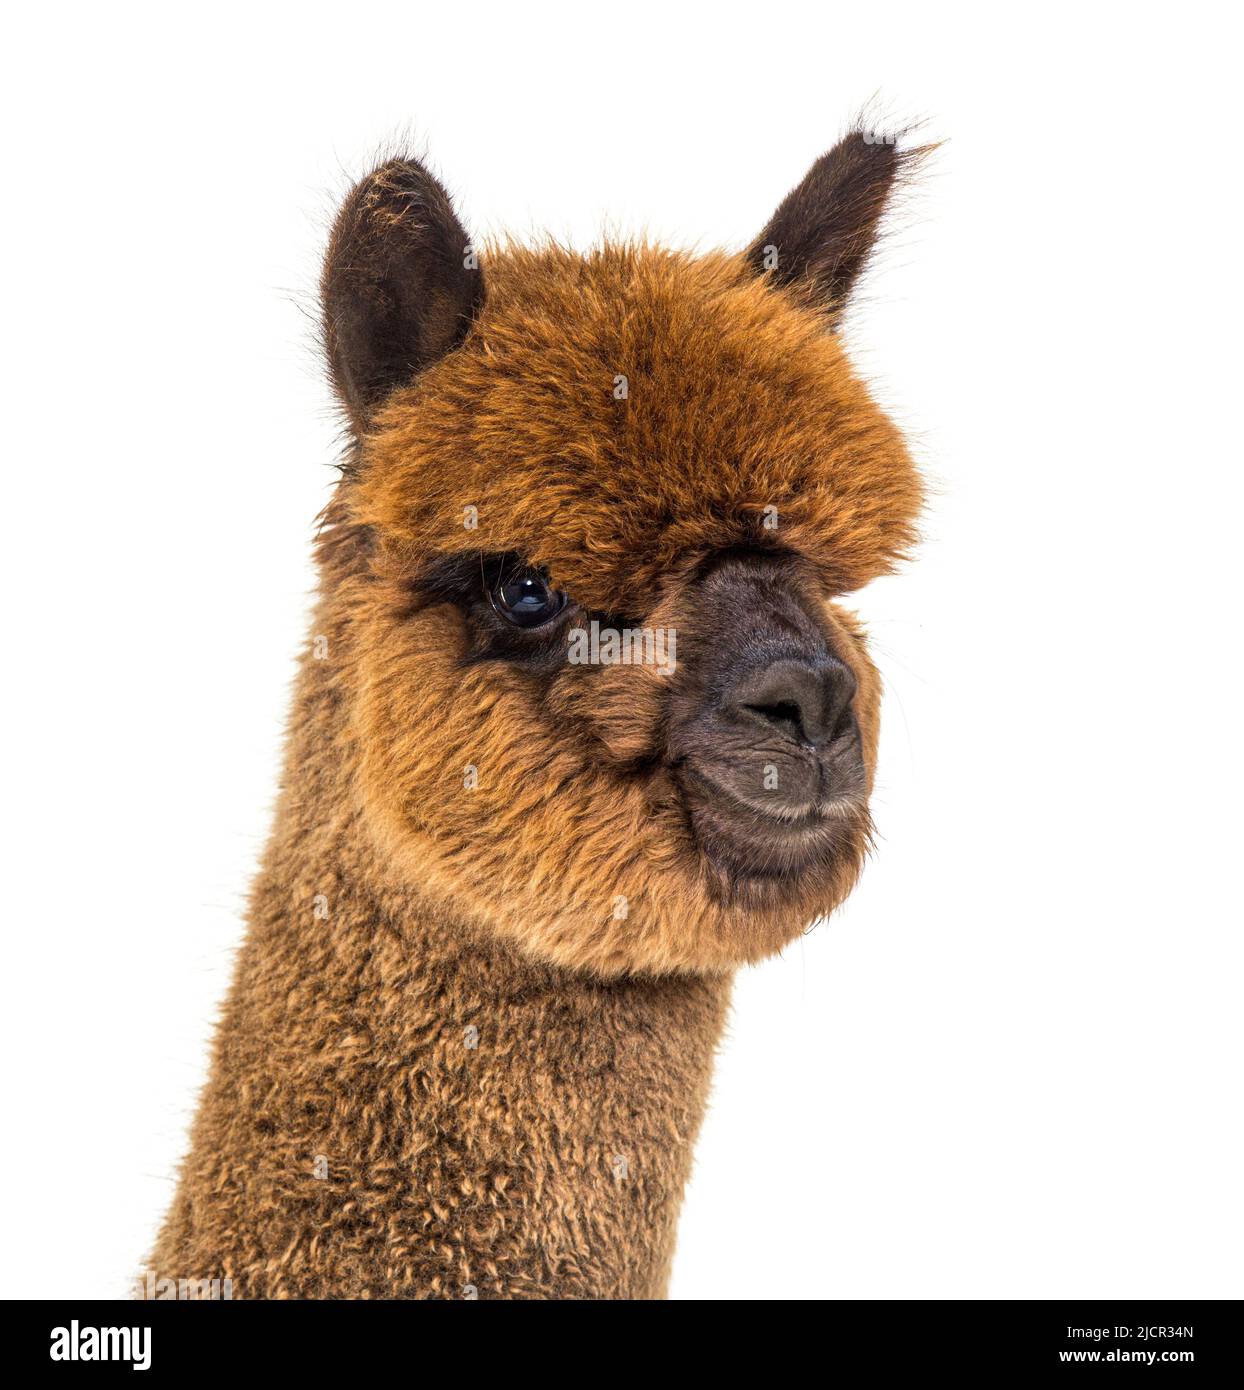 Portrait of a brown alpaca - Lama pacos, isoltaed on white Stock Photo